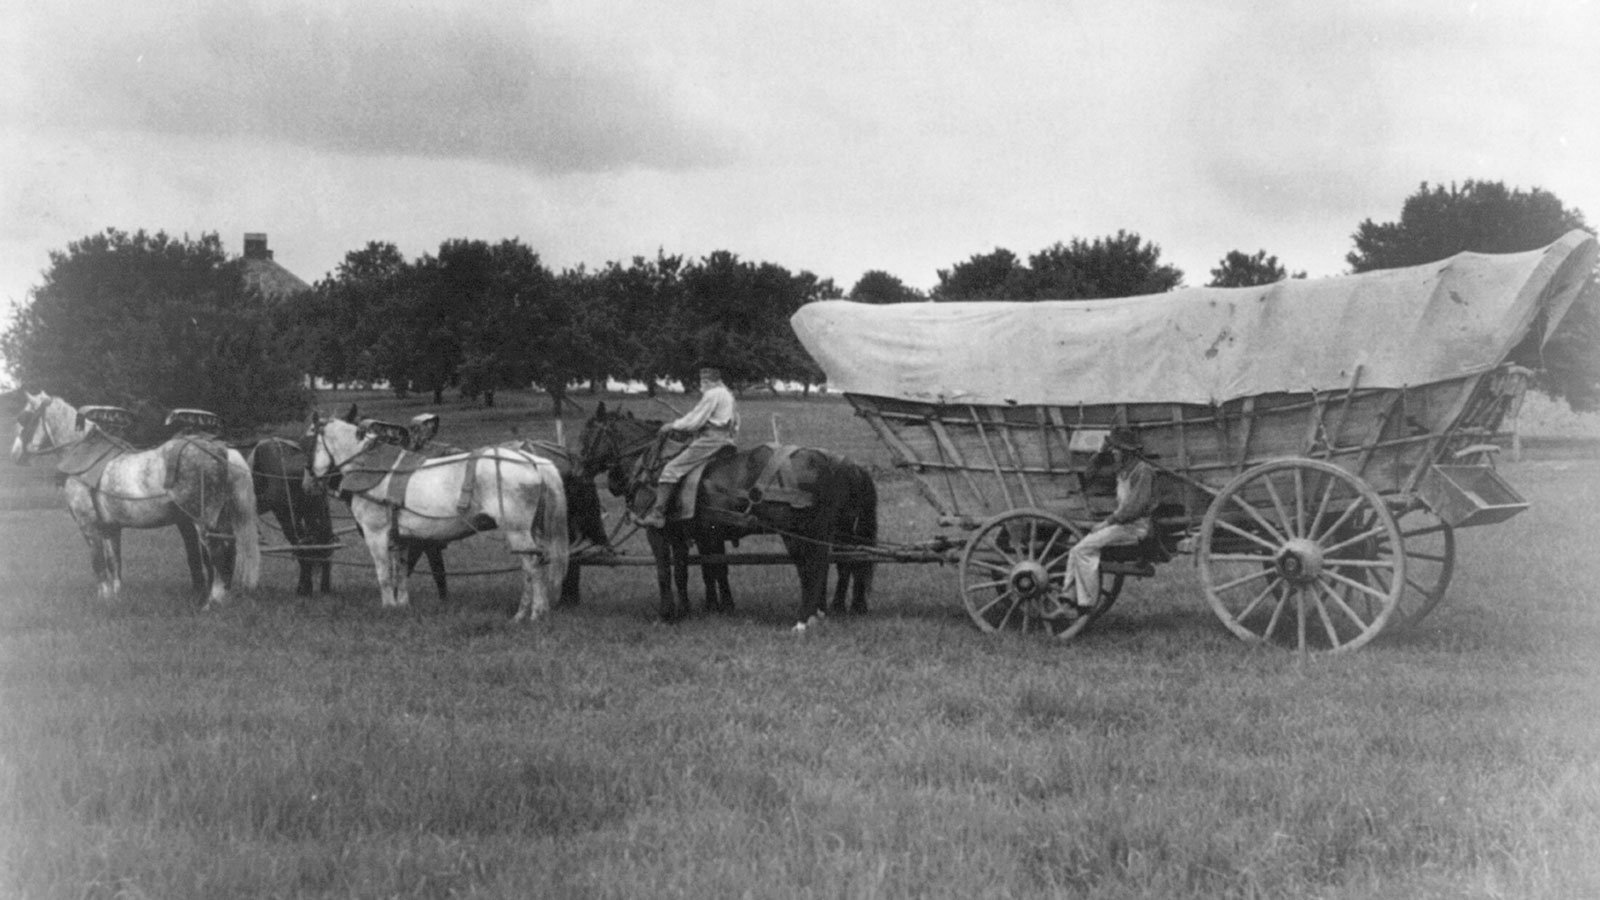 Conestoga wagon was used for carrying freight on the National Pike